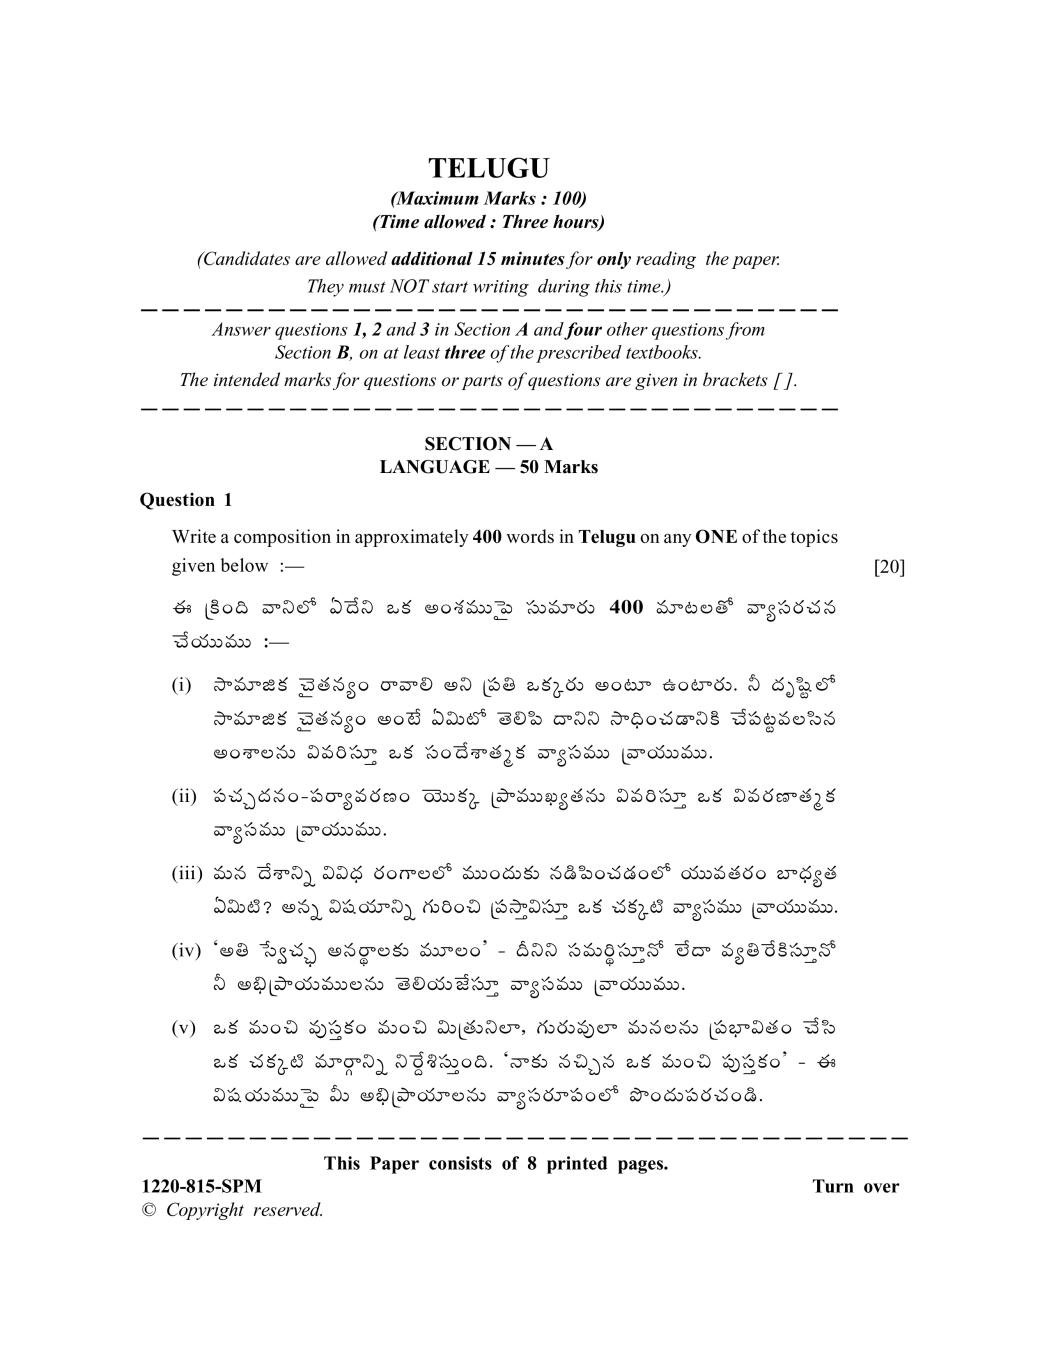 ISC Class 12 Specimen Paper 2020 for Telugu - Page 1